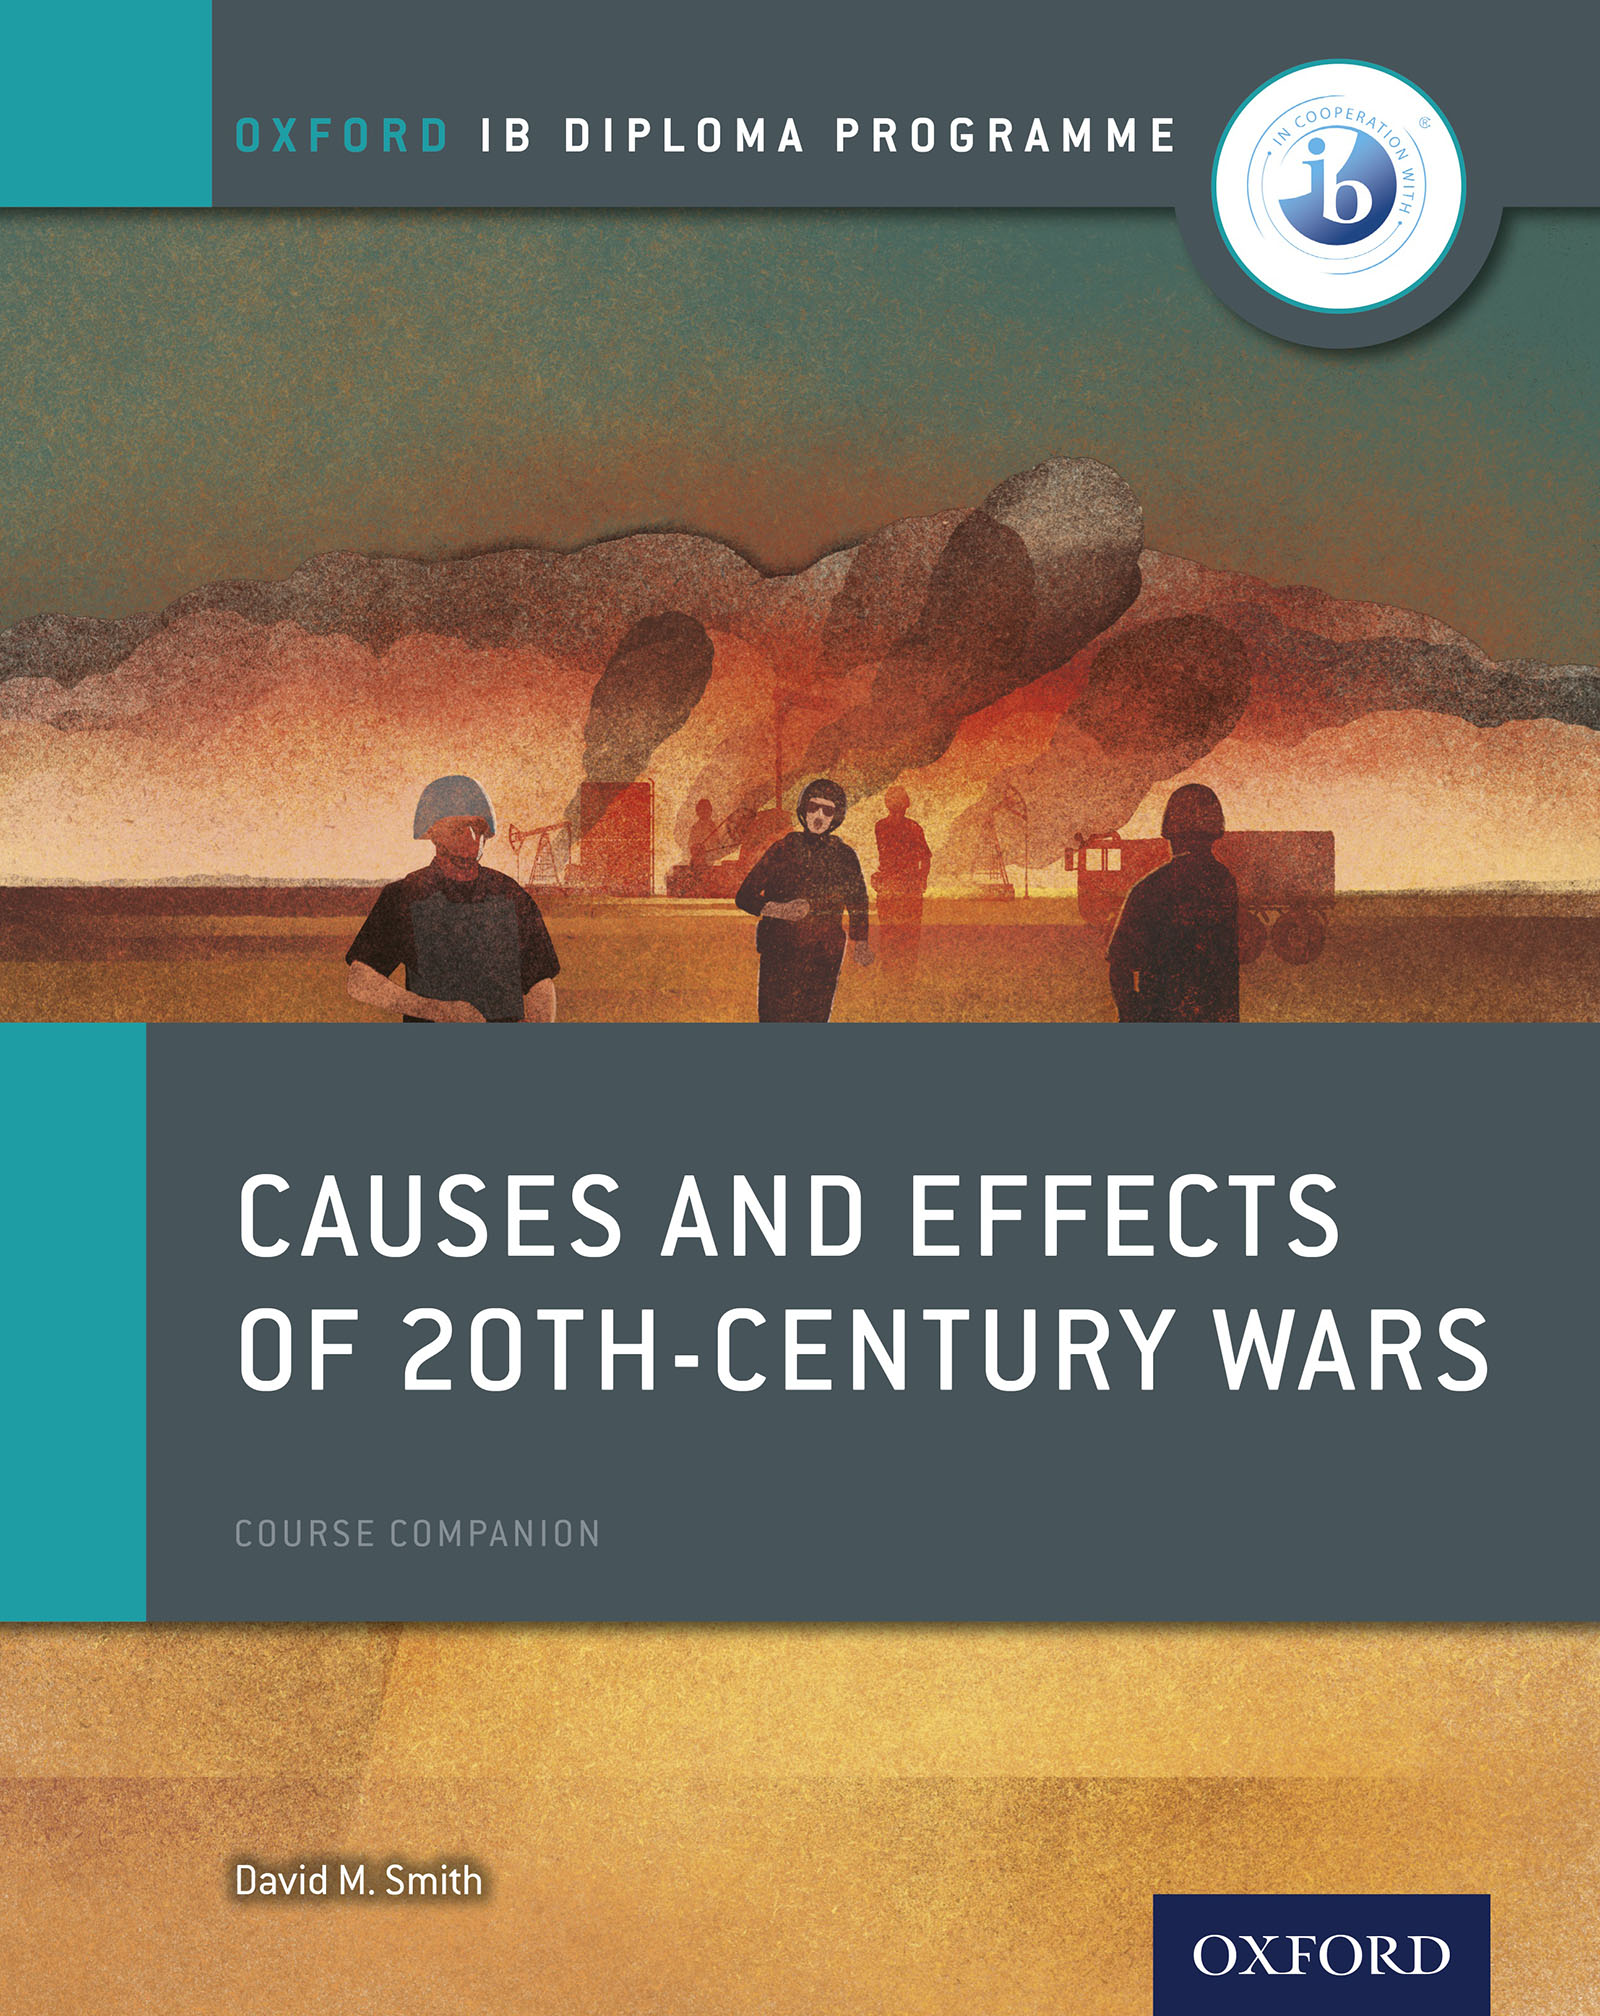 Oxford IB Diploma Programme: Causes and Effects of 20th-Century Wars Course Companion